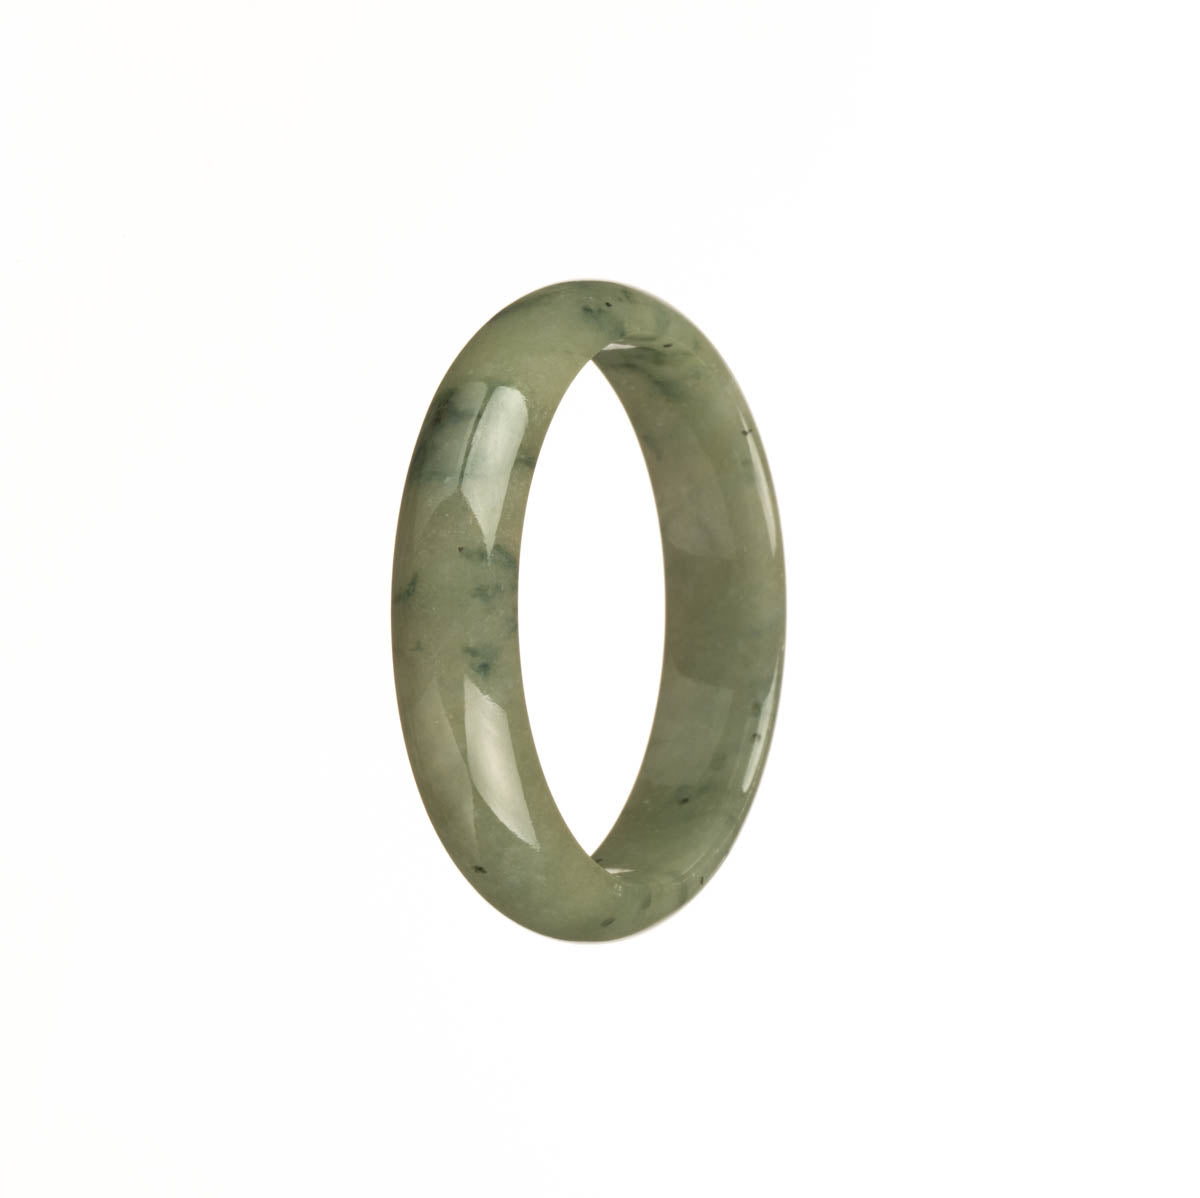 A close-up image of a green jade bangle with a unique half moon shape, showcasing the beautiful patterns of the genuine grade A jadeite jade.